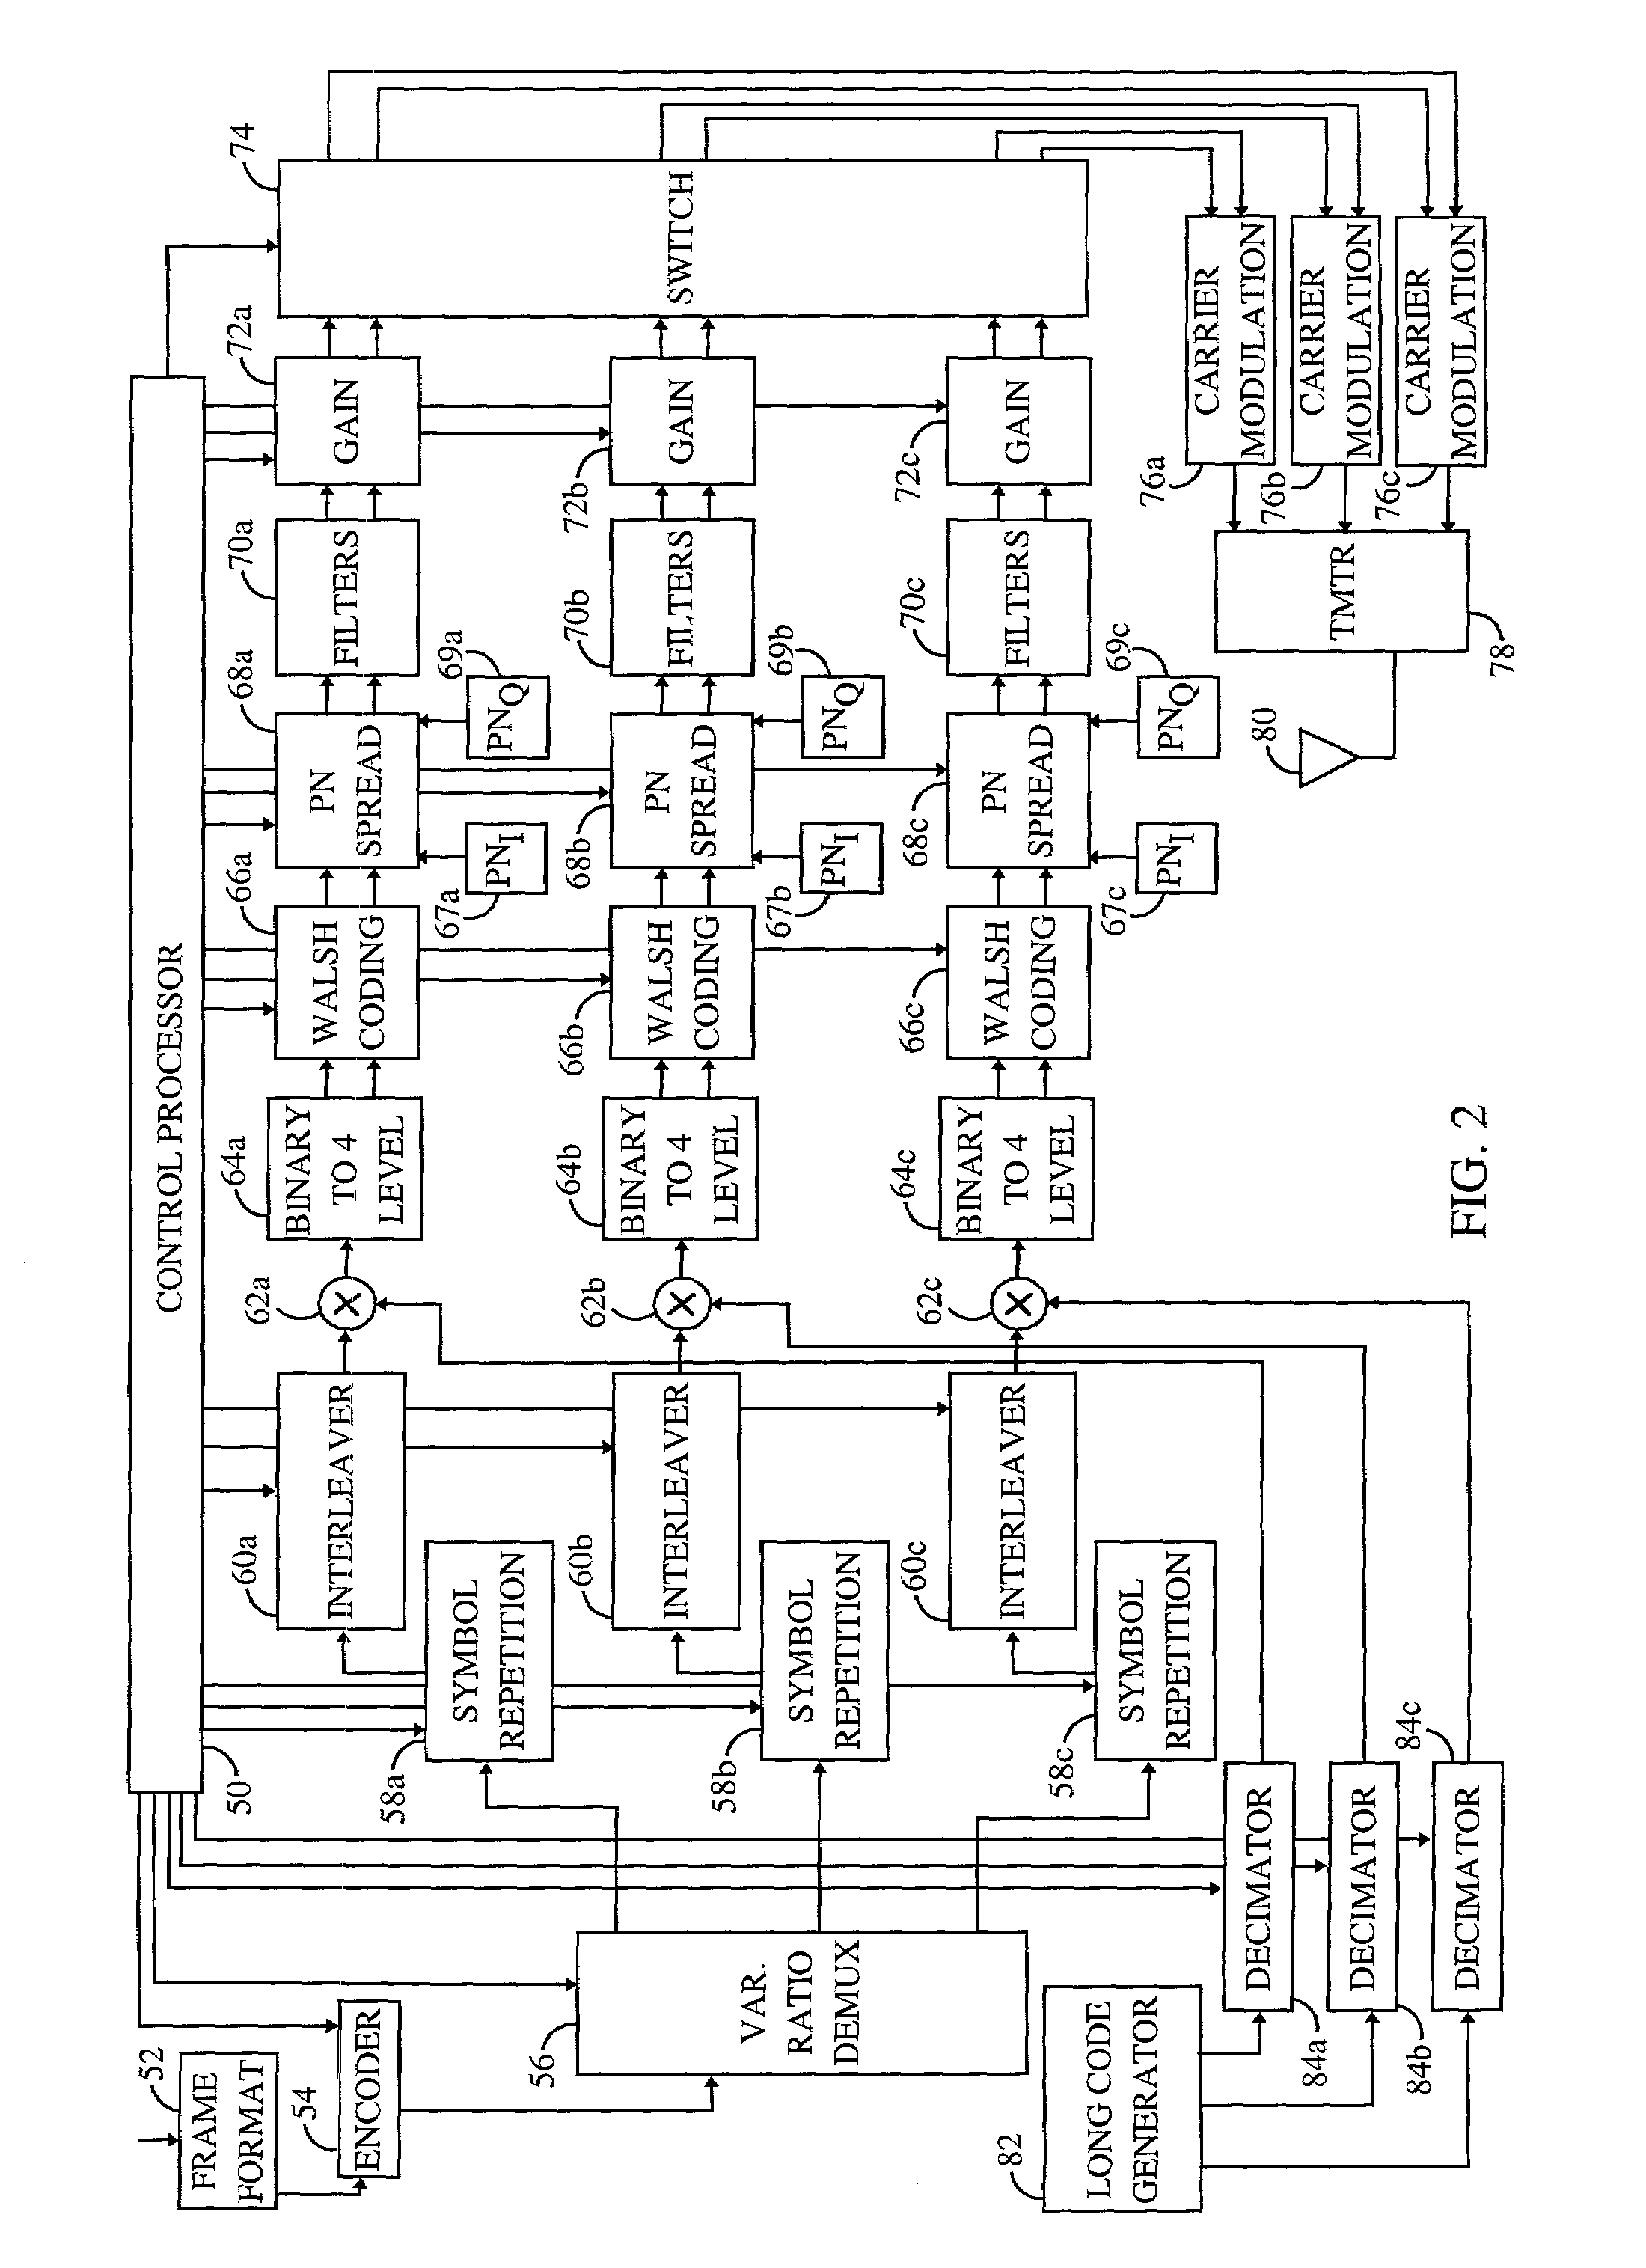 Method and apparatus for transmitting and receiving high speed data in a CDMA communication system using multiple carriers